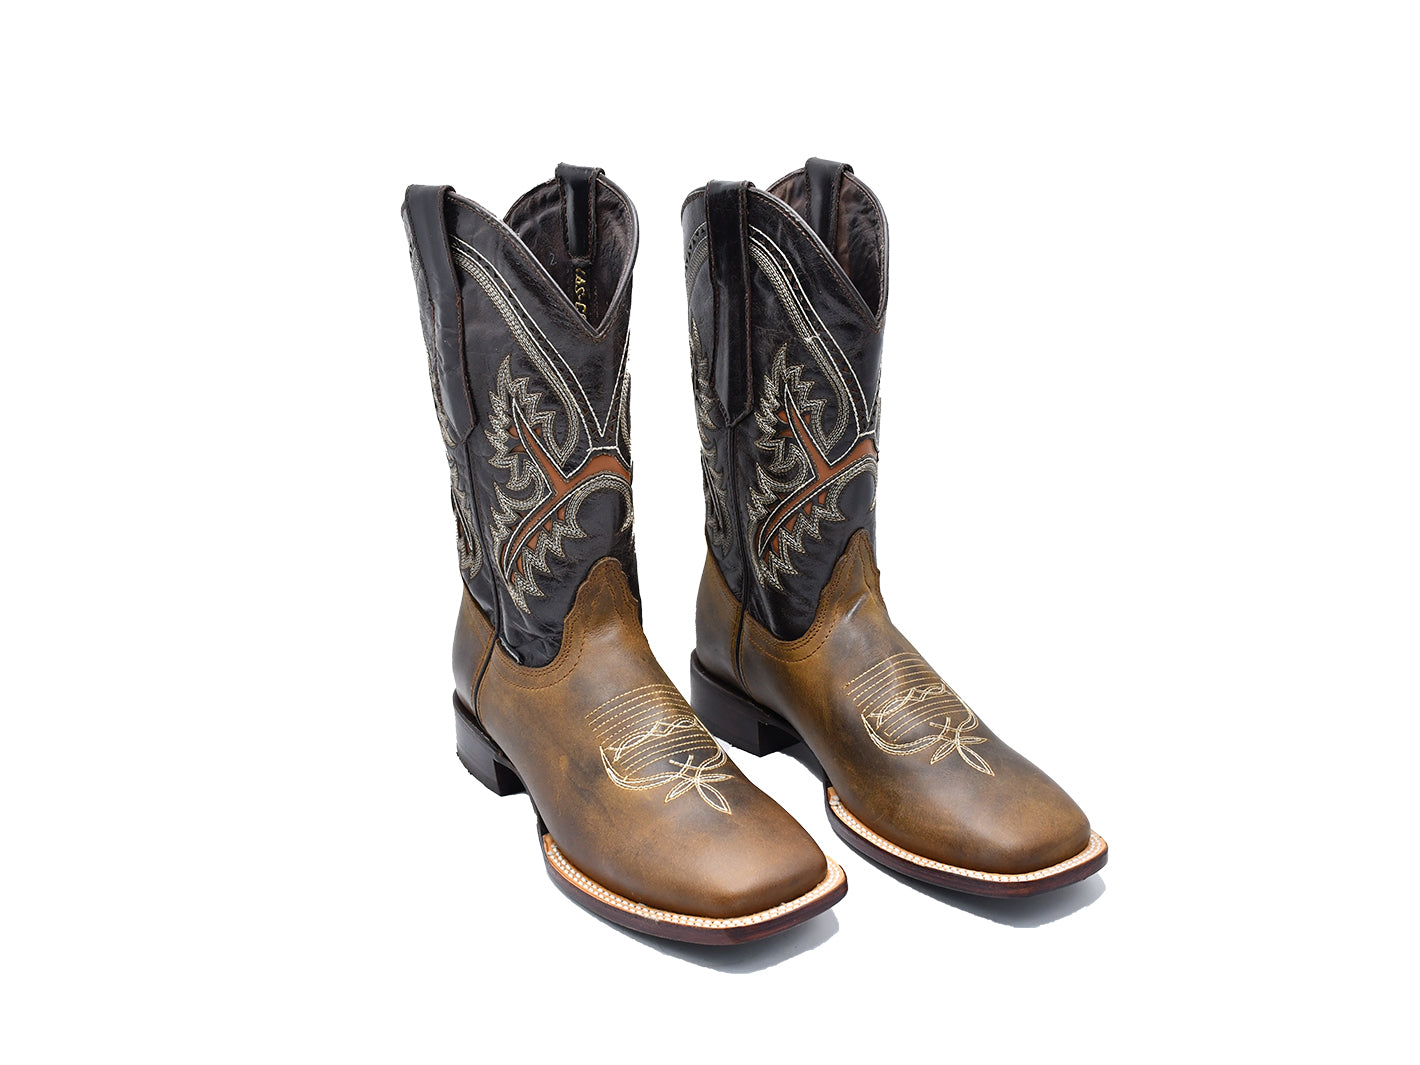 ALL TEXAS COUNTRY BOOTS